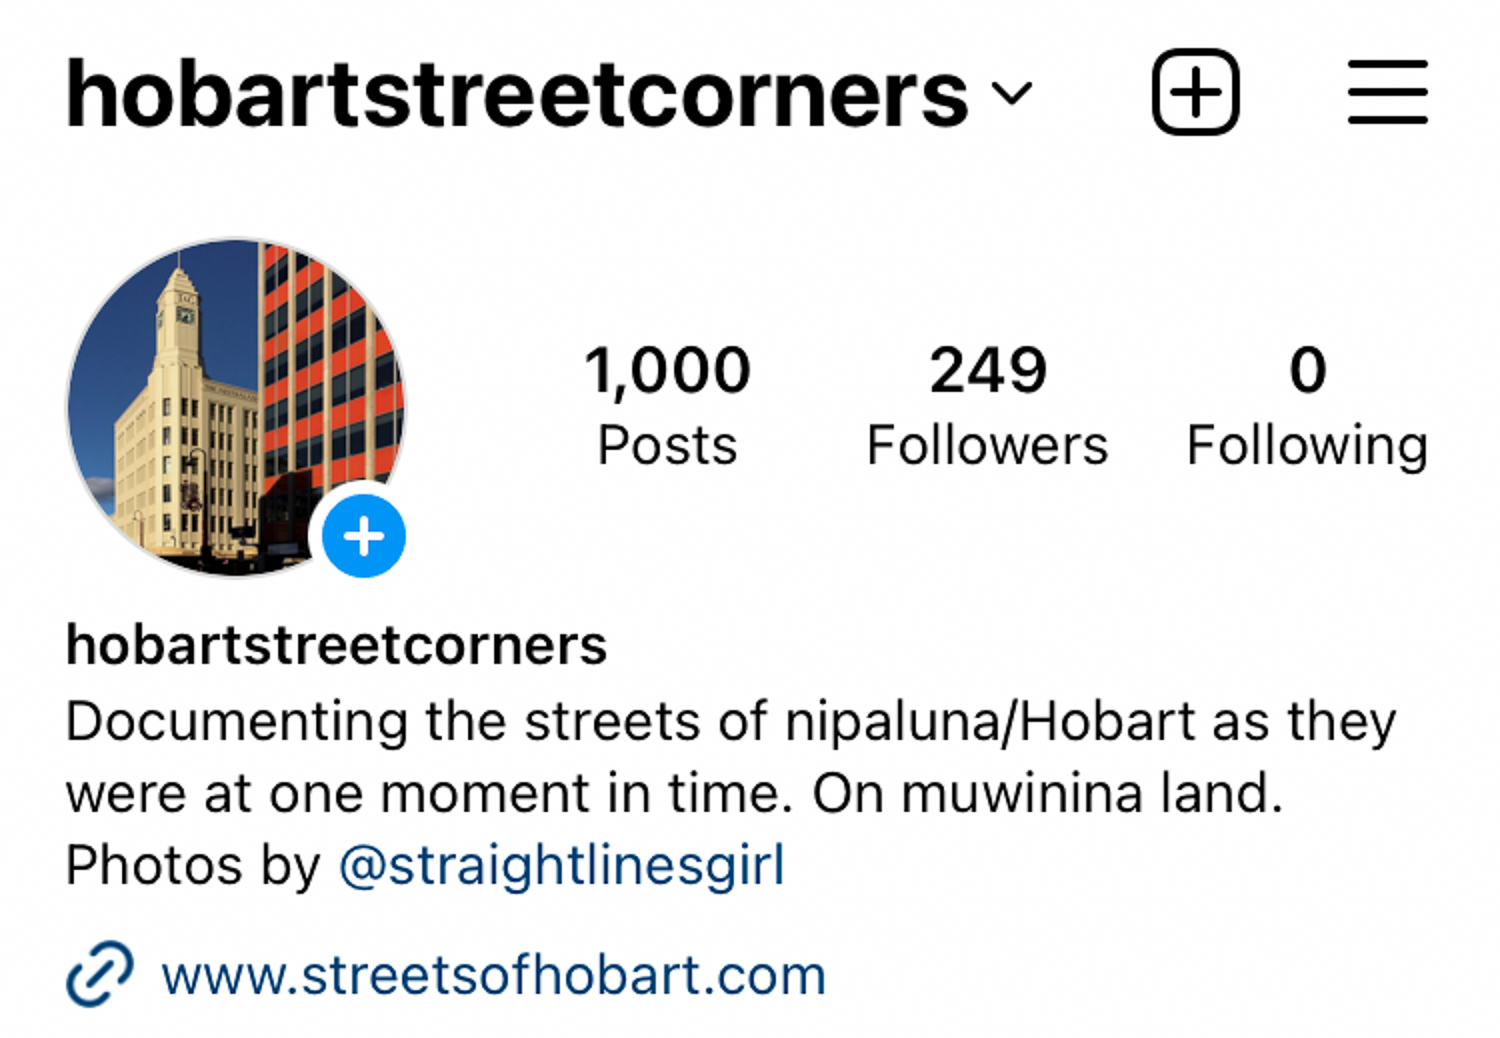 A profile of the Instagram account of Hobart Street Corners showing 1000 posts and 249 followers